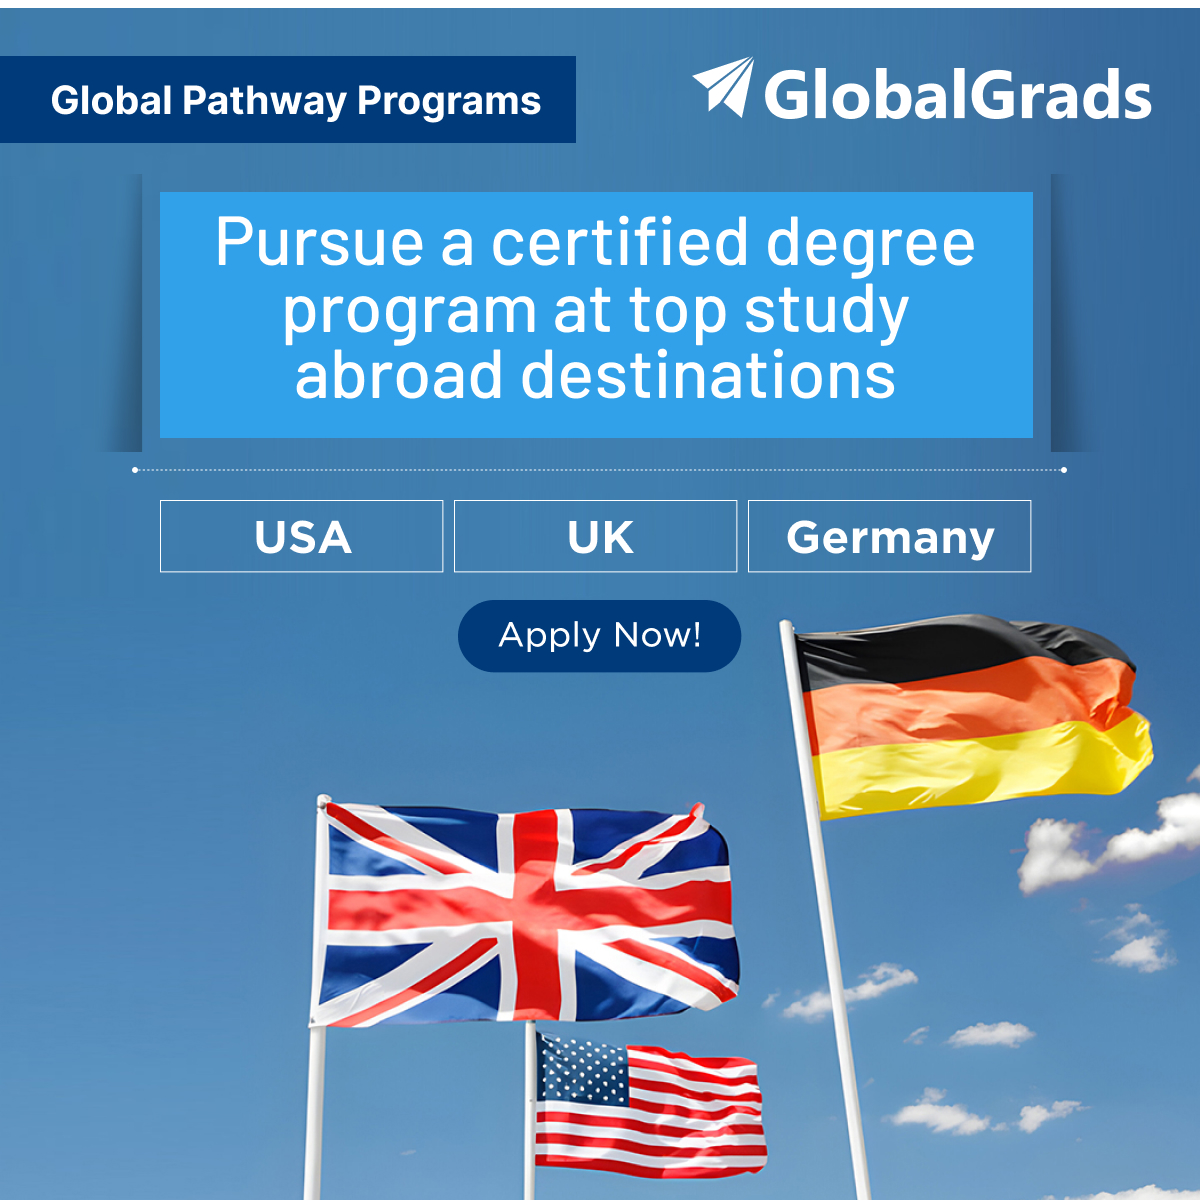 Explore vibrant cultures & renowned universities with Global Pathway Programs. Choose from the USA, Germany, or UK. Earn a  international degree and become a responsible global citizen – apply now!
#StudyAbroad #HigherEd #GlobalEducation #EducationAbroad #InternationalStudents